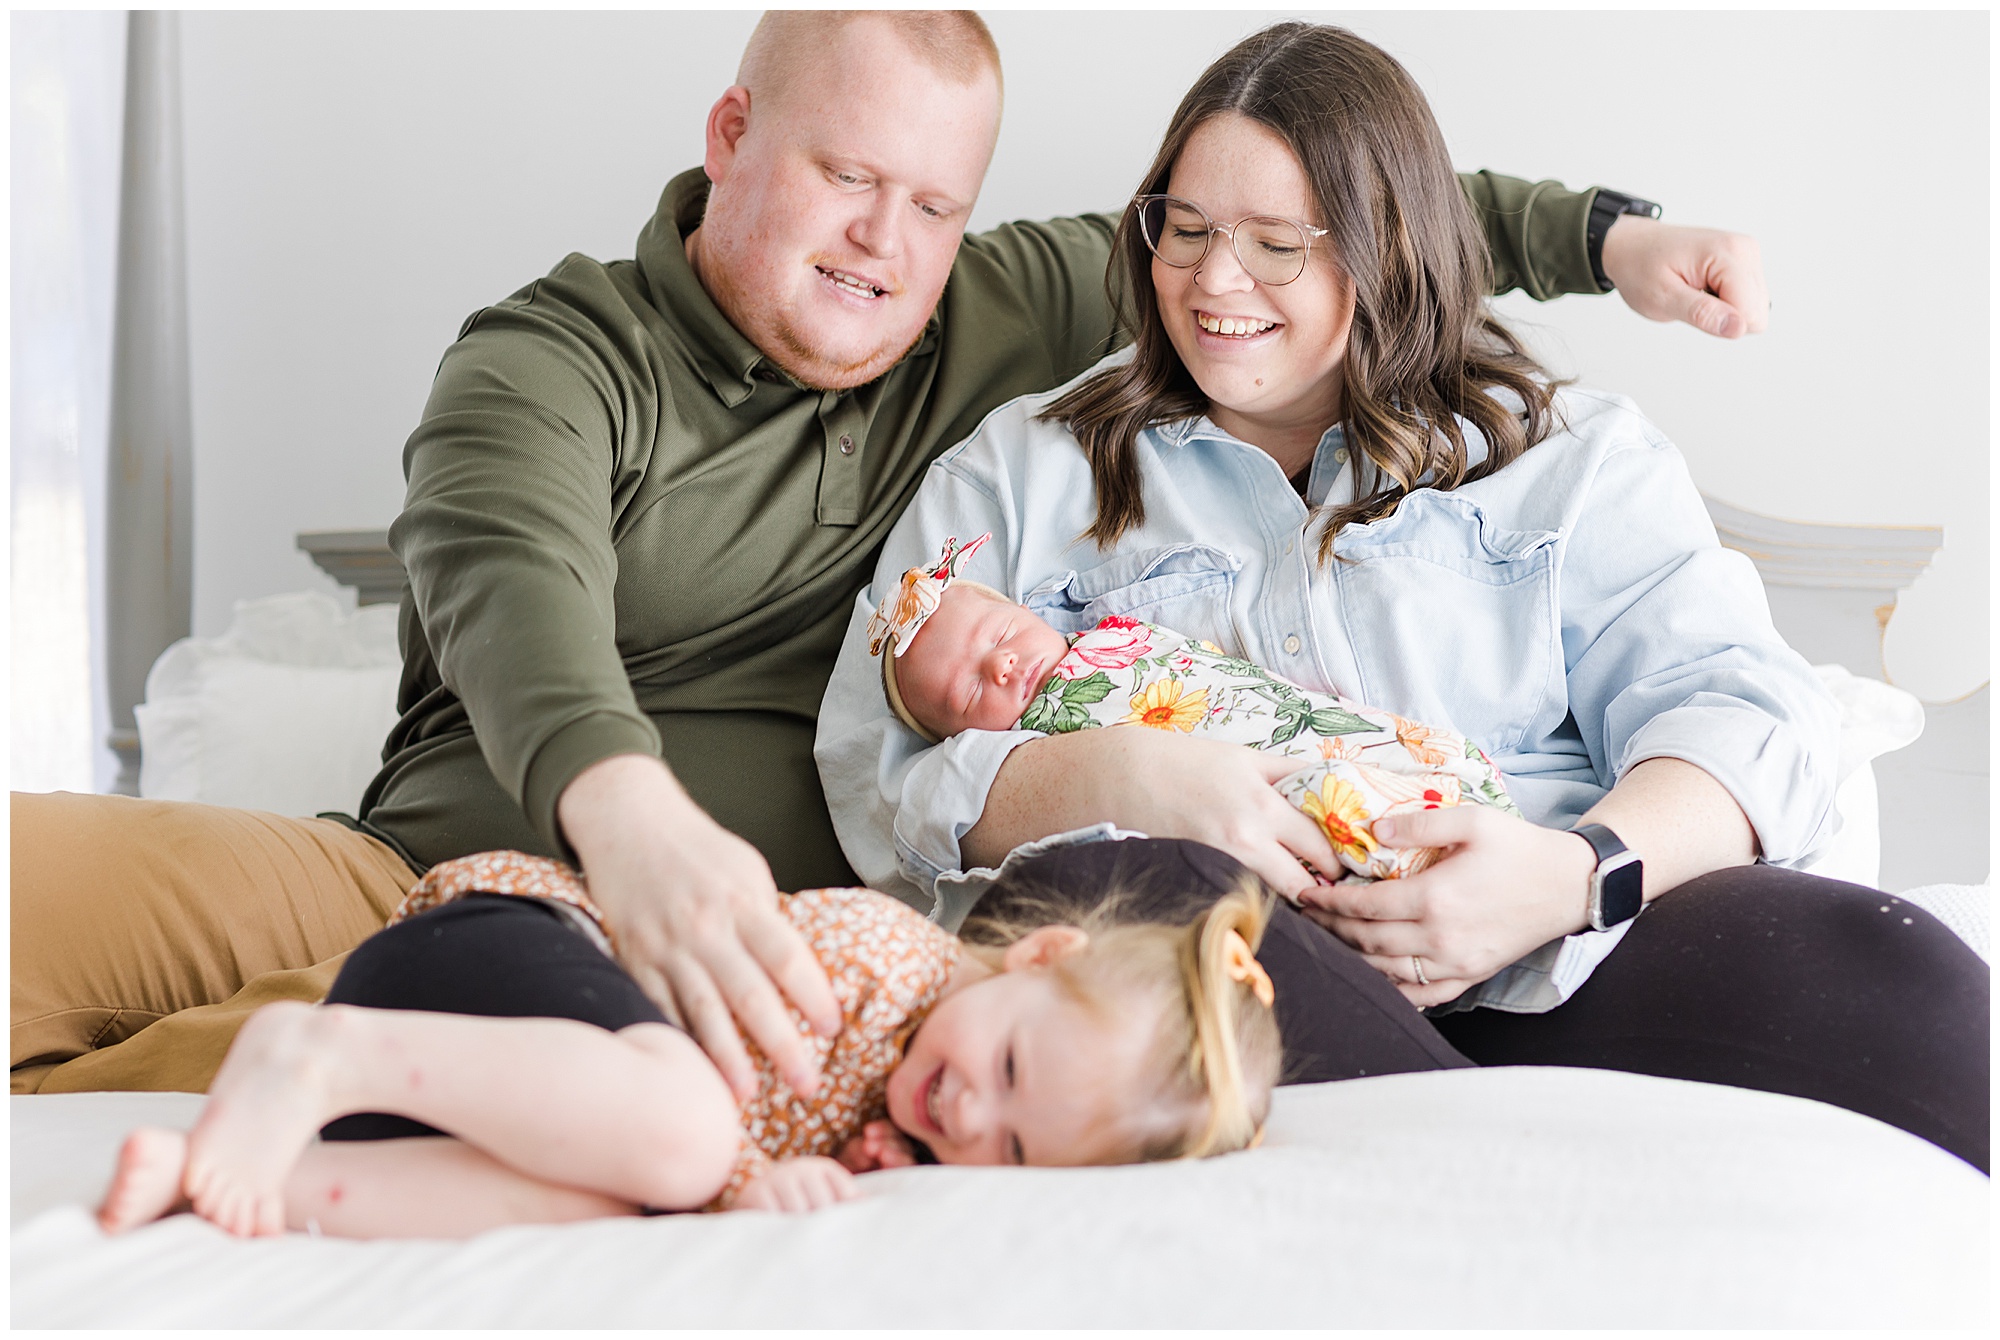 Dad in dark green shirt tickles toddler daughter while mom in light blue shirt holds newborn infant while they sit on a bed with white linens during newborn session. 